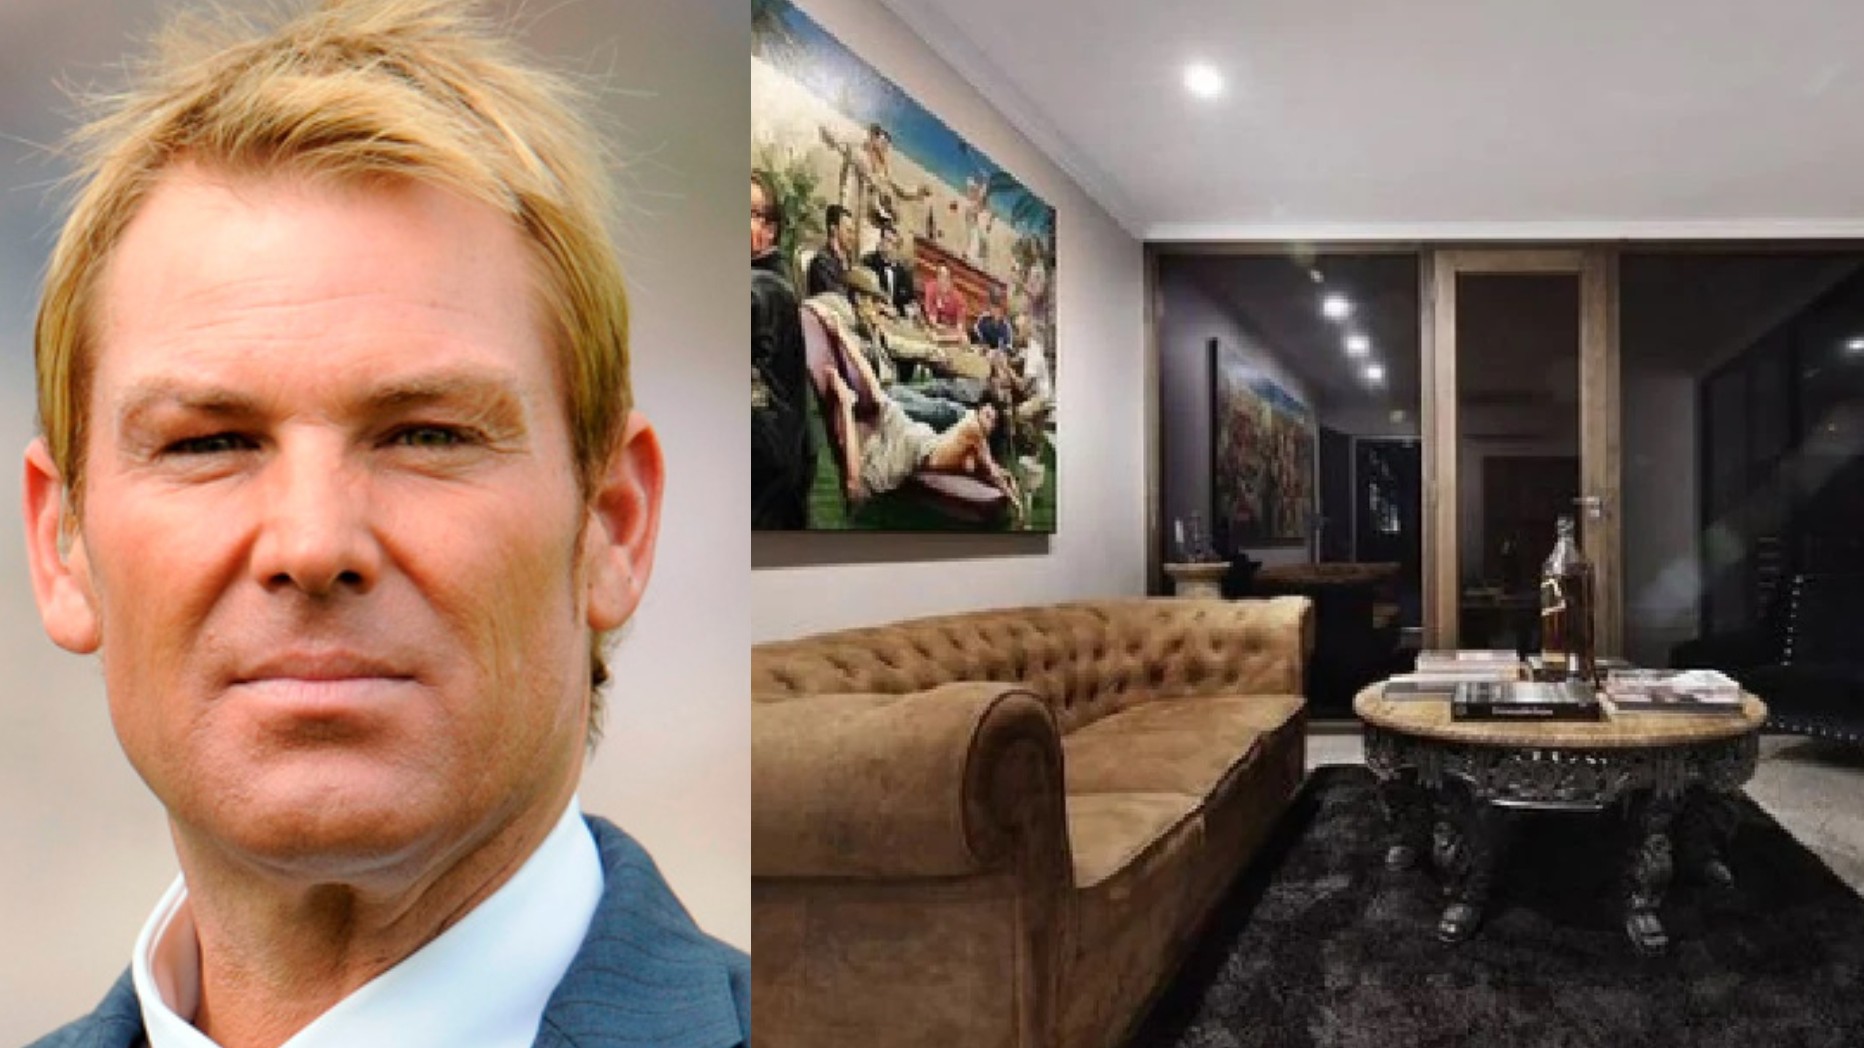 Shane Warne lists his stunning Melbourne home for sale; eyes a $7.4 million payday